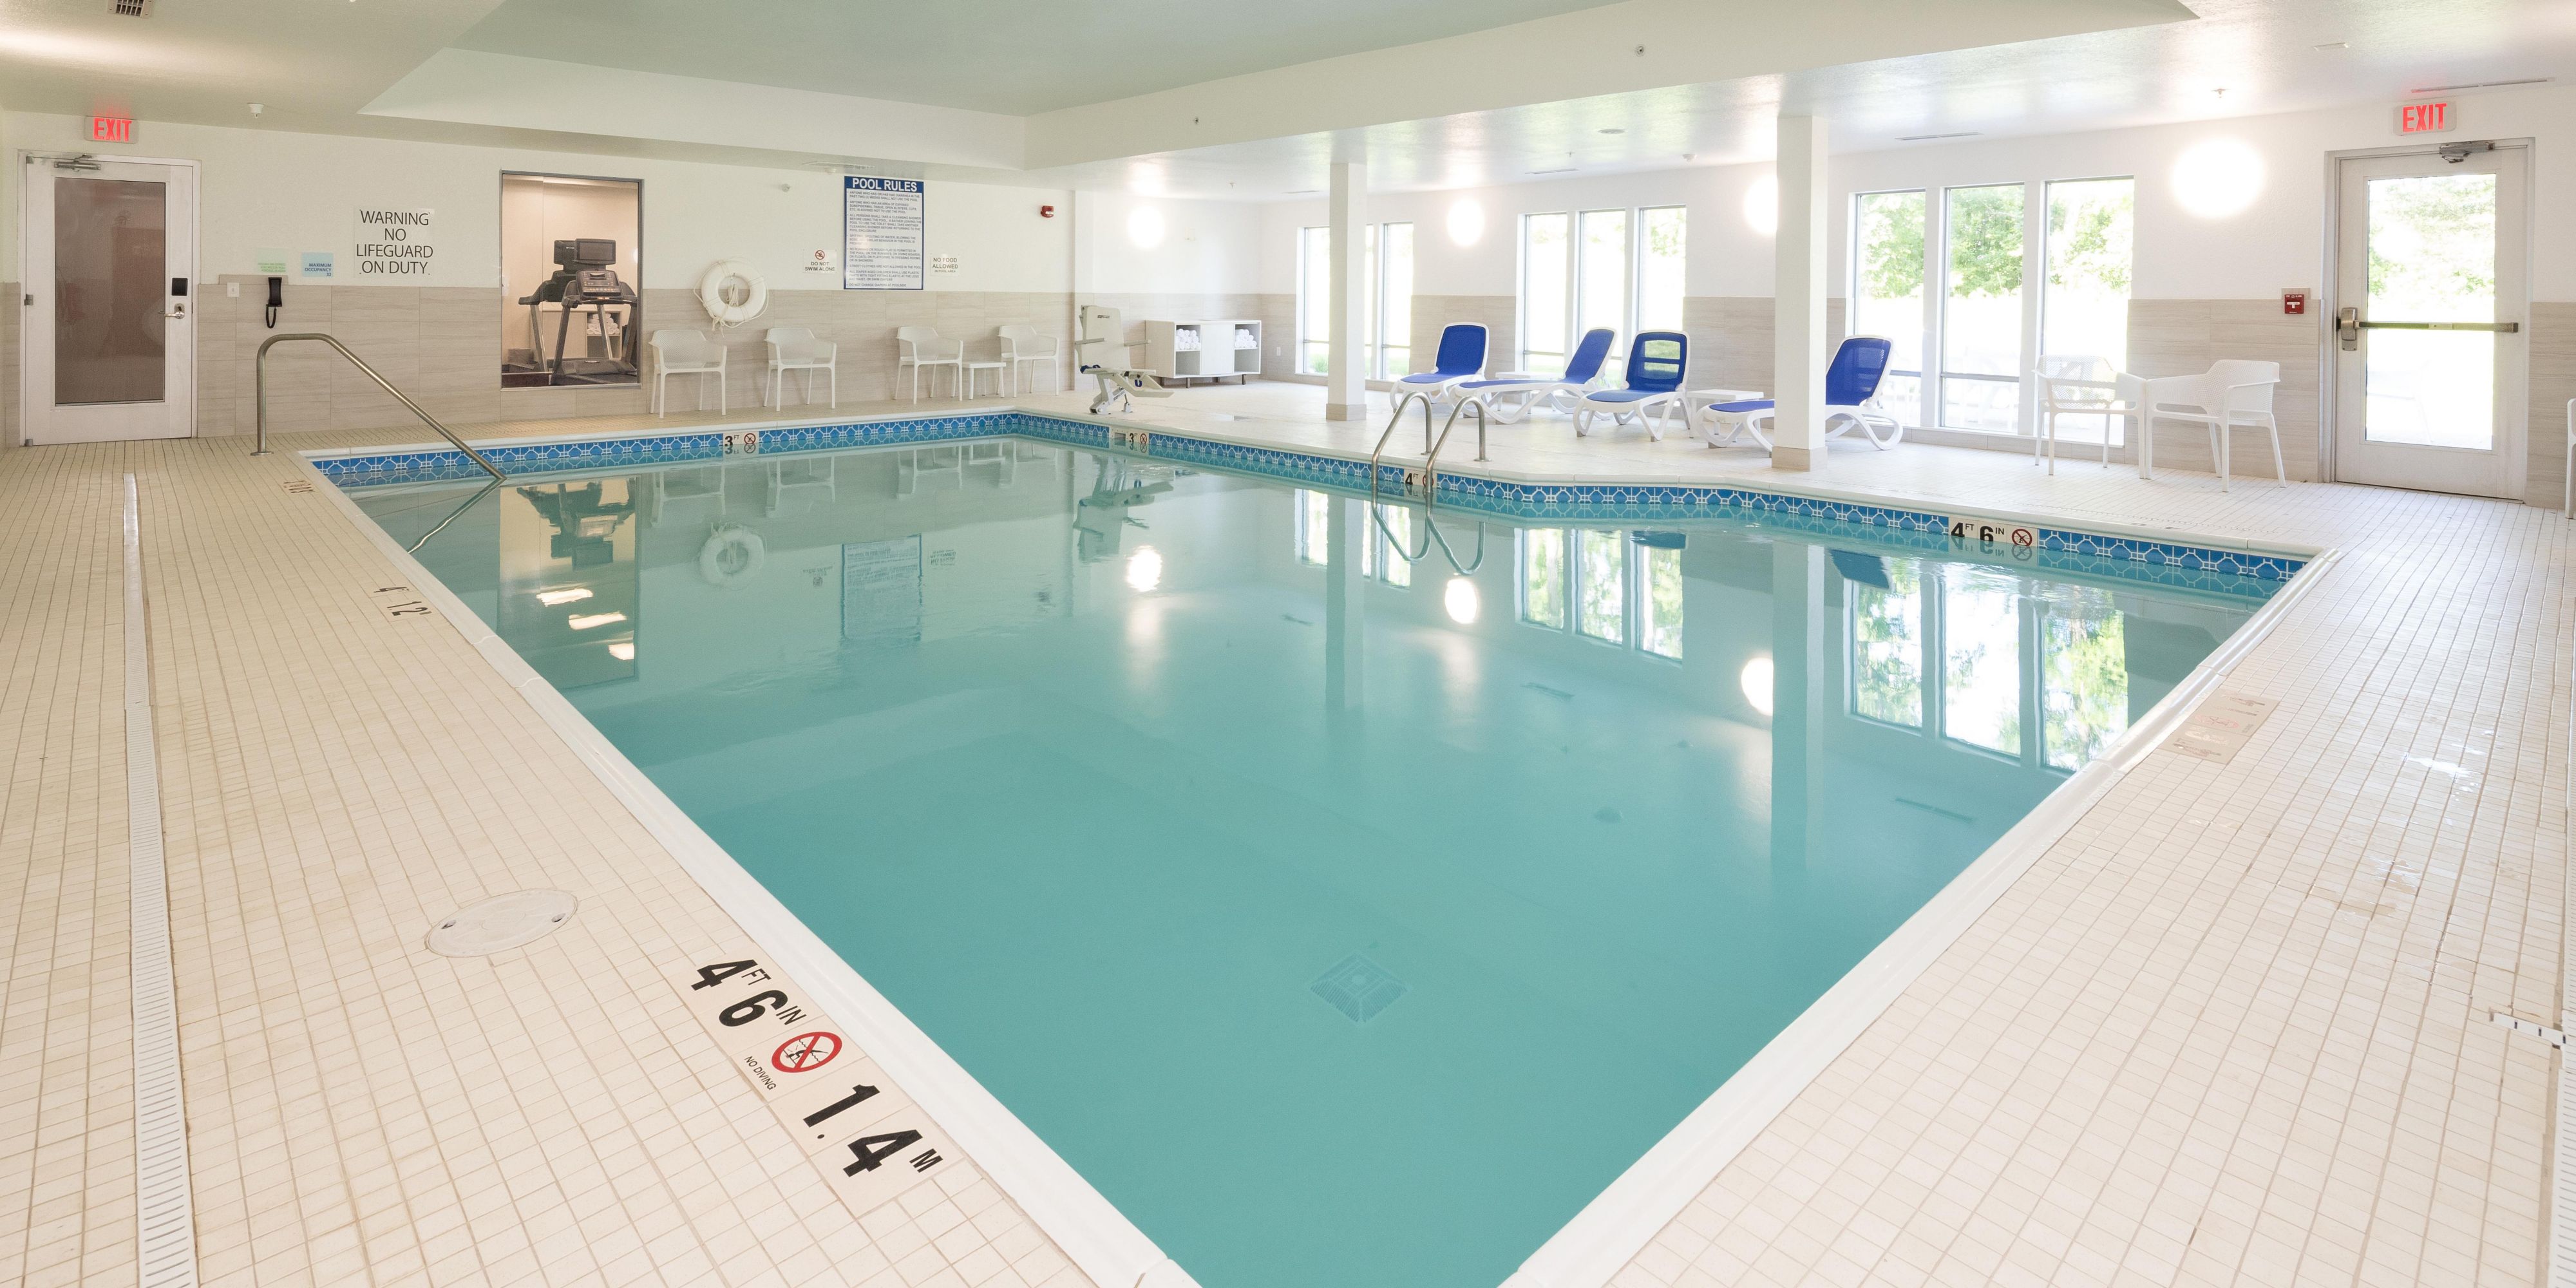 The kids will love our indoor heated pool. The pool is open from 10 am until 11 pm daily.